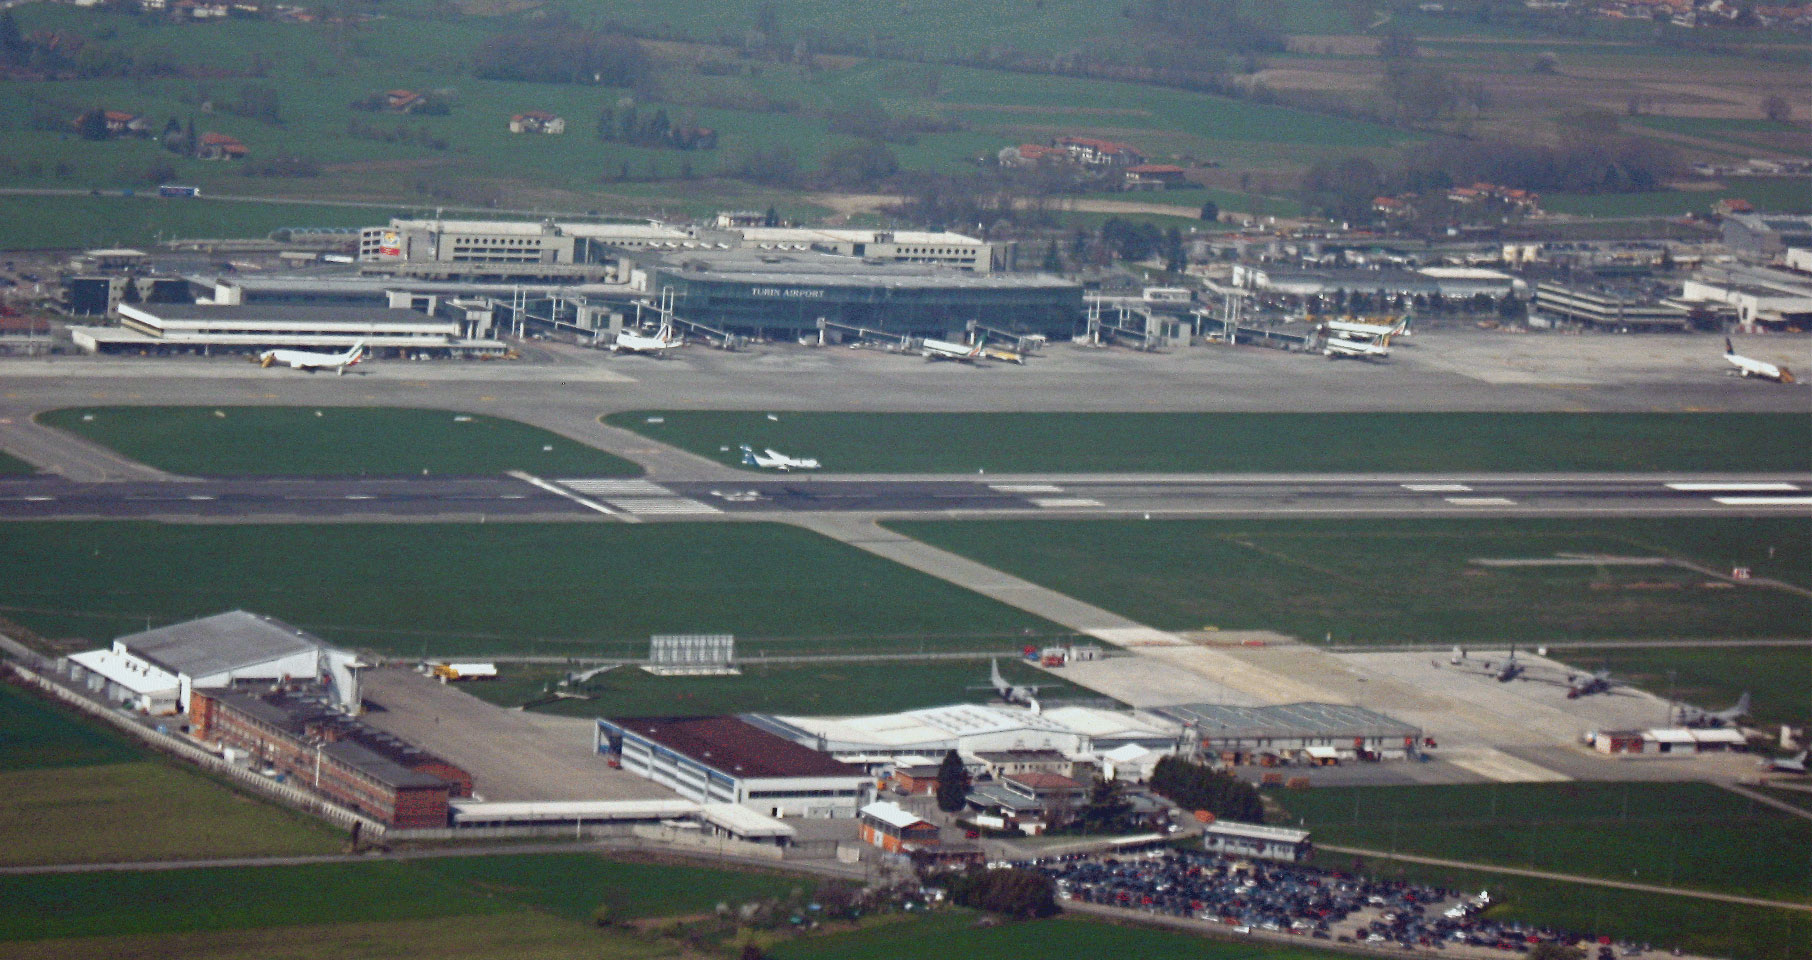 The airport is named Sandro Pertini Airport due to the former Italian President. 